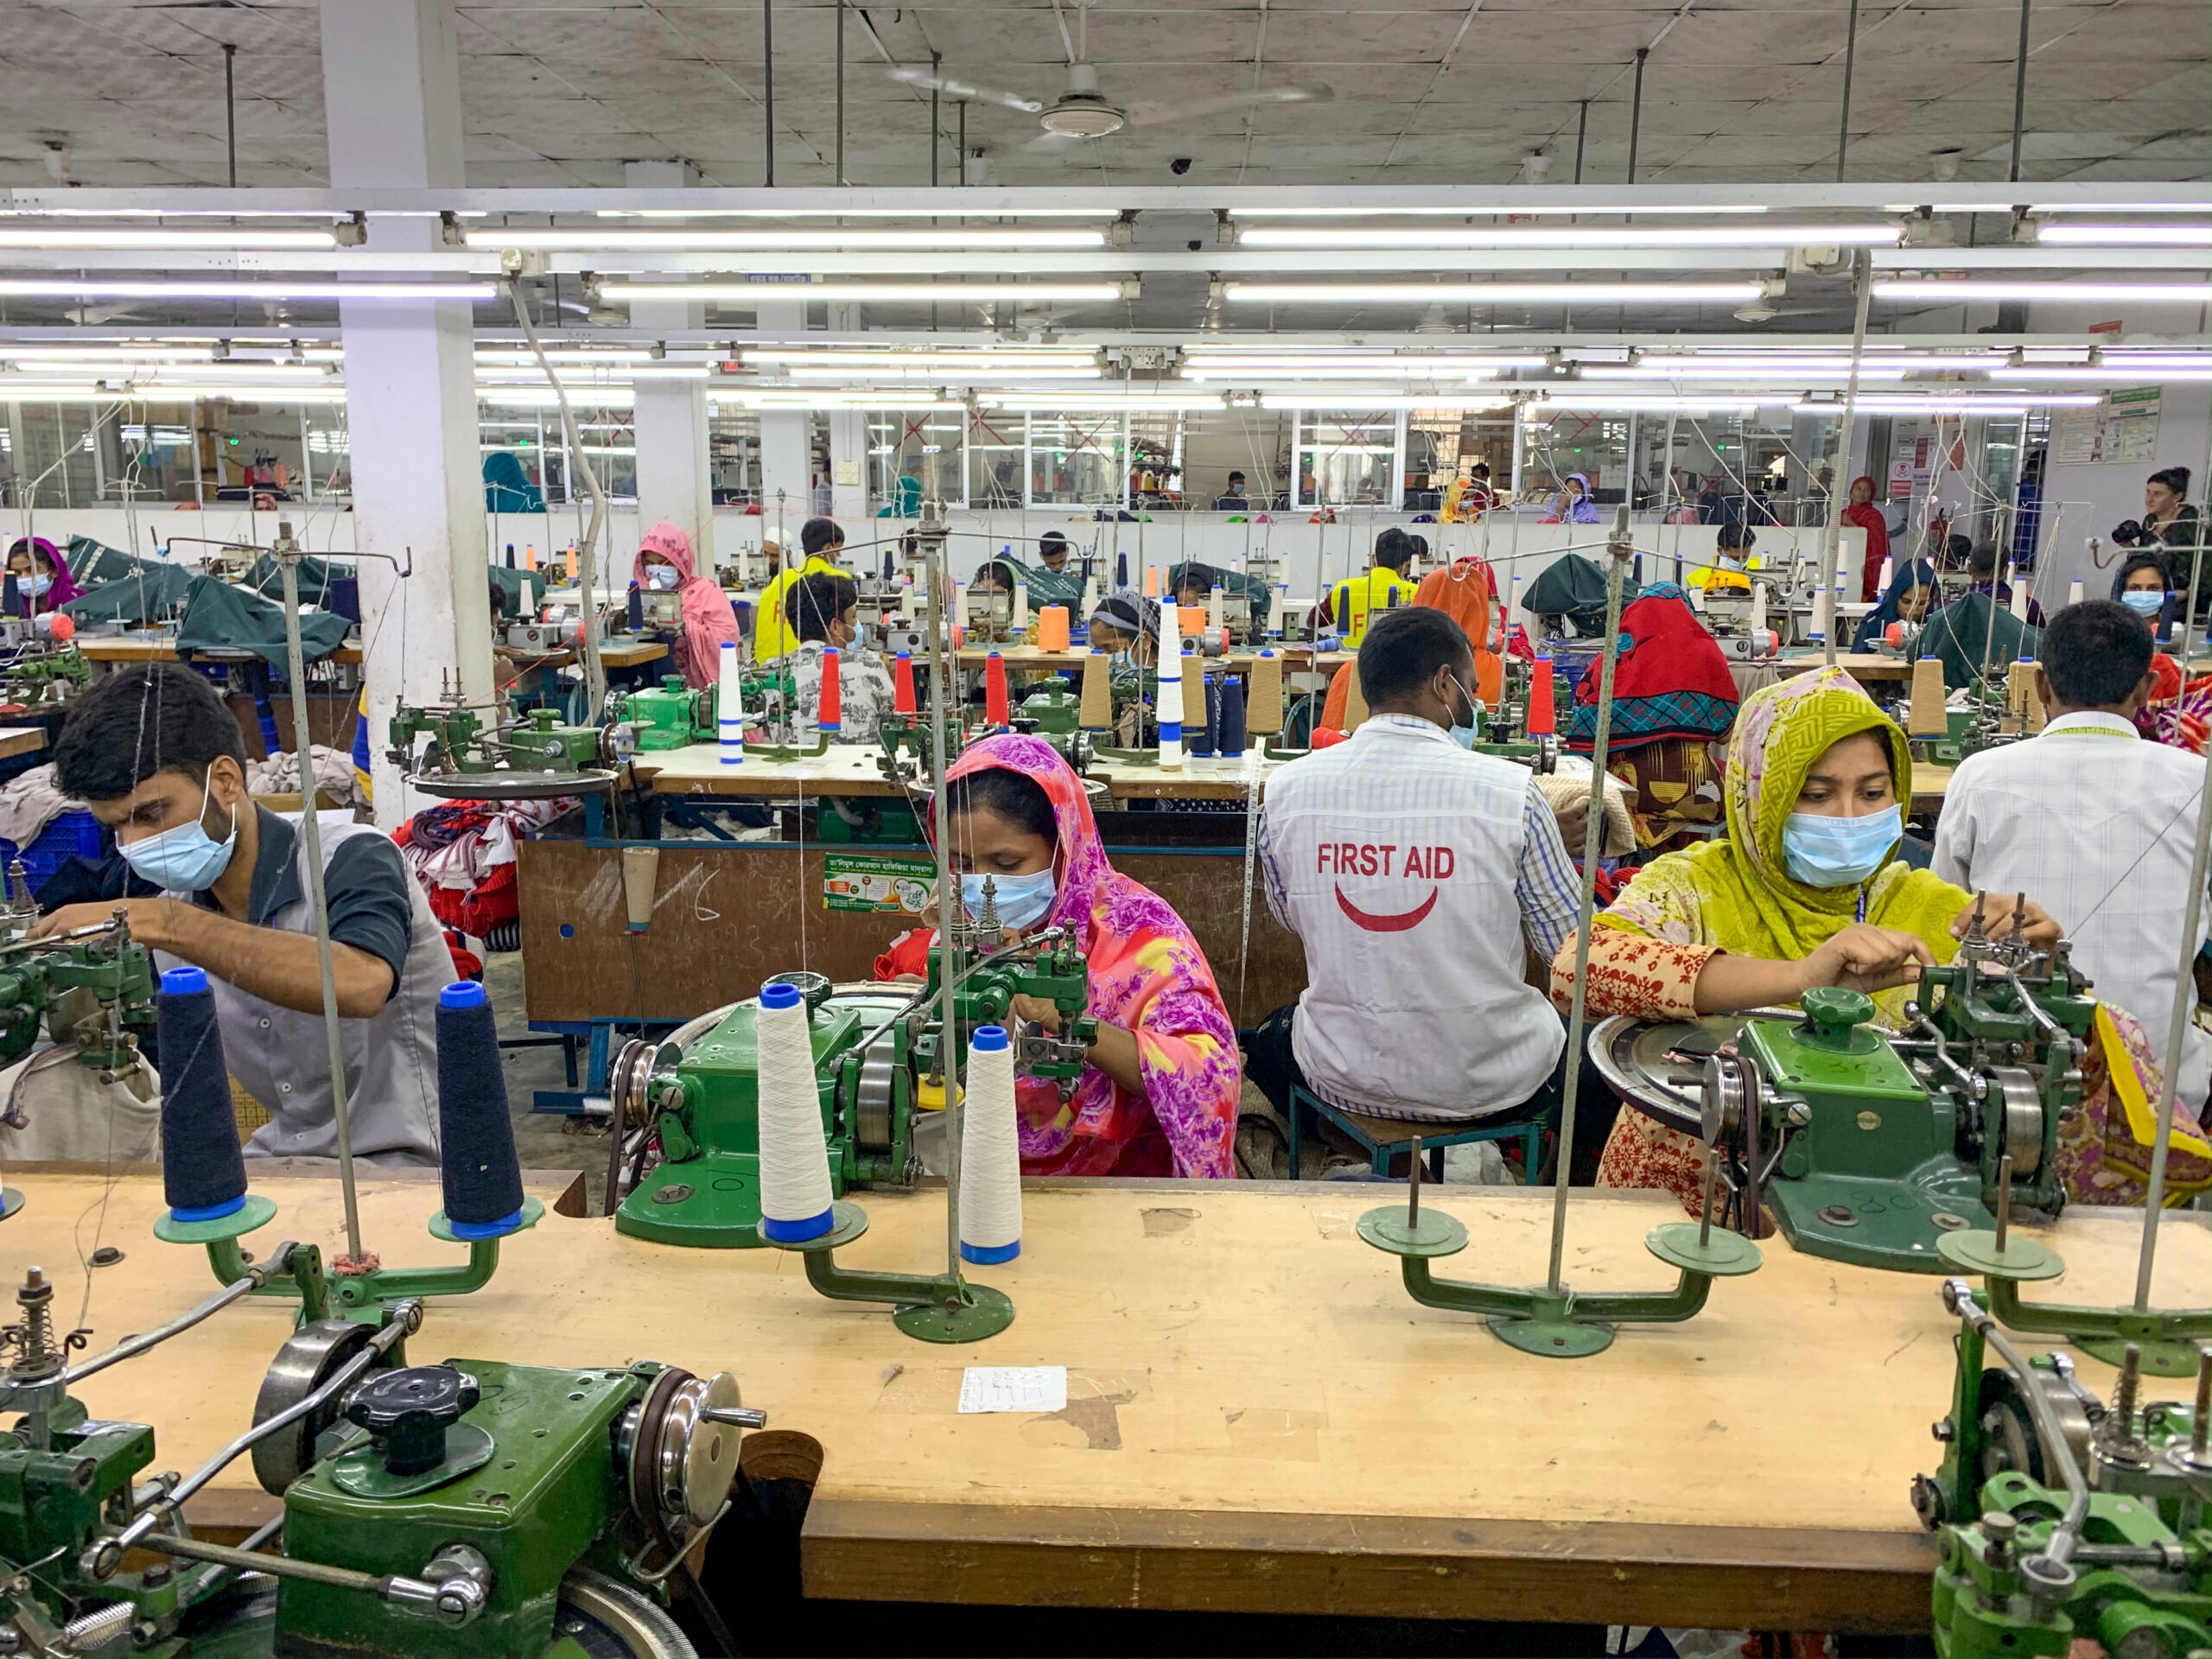 Workers operating machinery in a garment factory, two women face towards the camera though are focussed on their work. Other workers face away from the camera, one has 'First Aid' written on their bib.